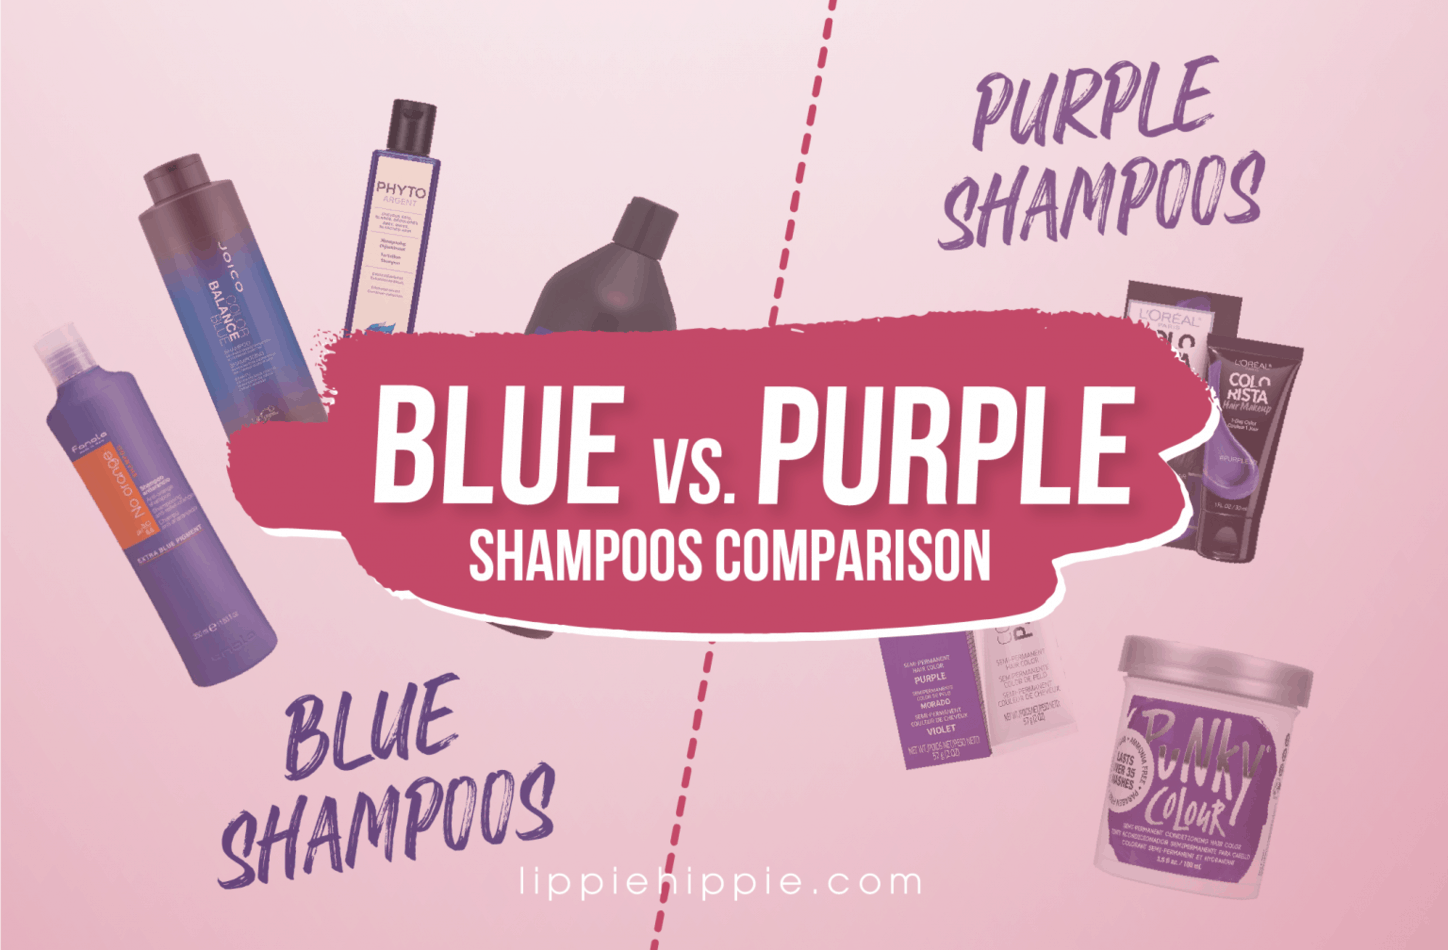 8. "Blue Shampoo vs Purple Shampoo: Which is Better for Damaged Hair?" - wide 10